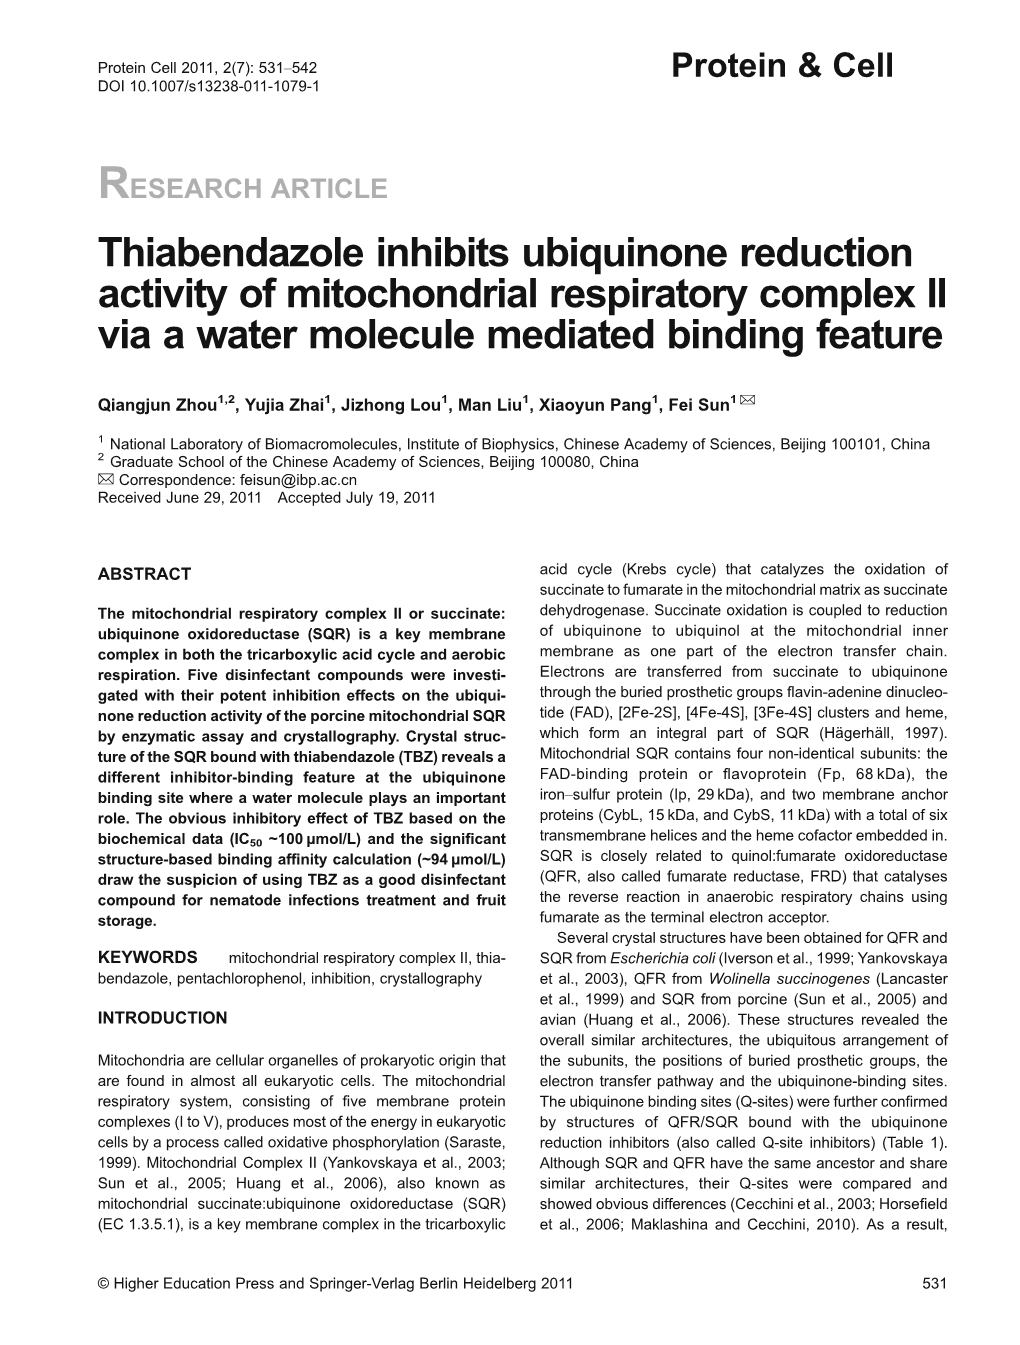 Thiabendazole Inhibits Ubiquinone Reduction Activity of Mitochondrial Respiratory Complex II Via a Water Molecule Mediated Binding Feature